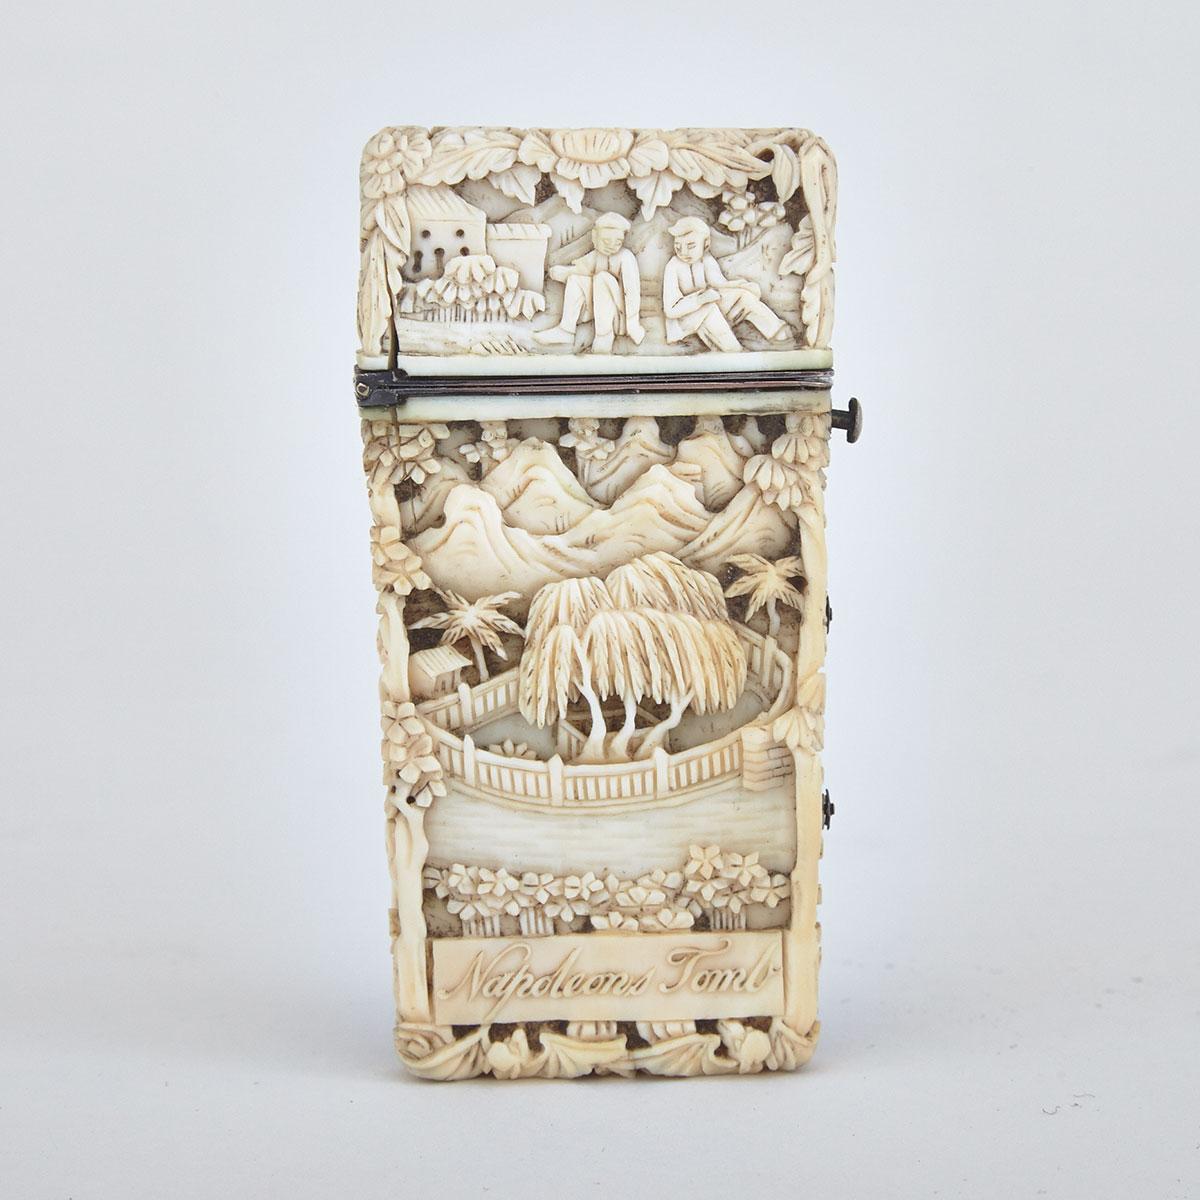 Chinese Export Silver Mounted Carved Ivory Lancet Case of Napoleonic Interest, 1st half, 19th century